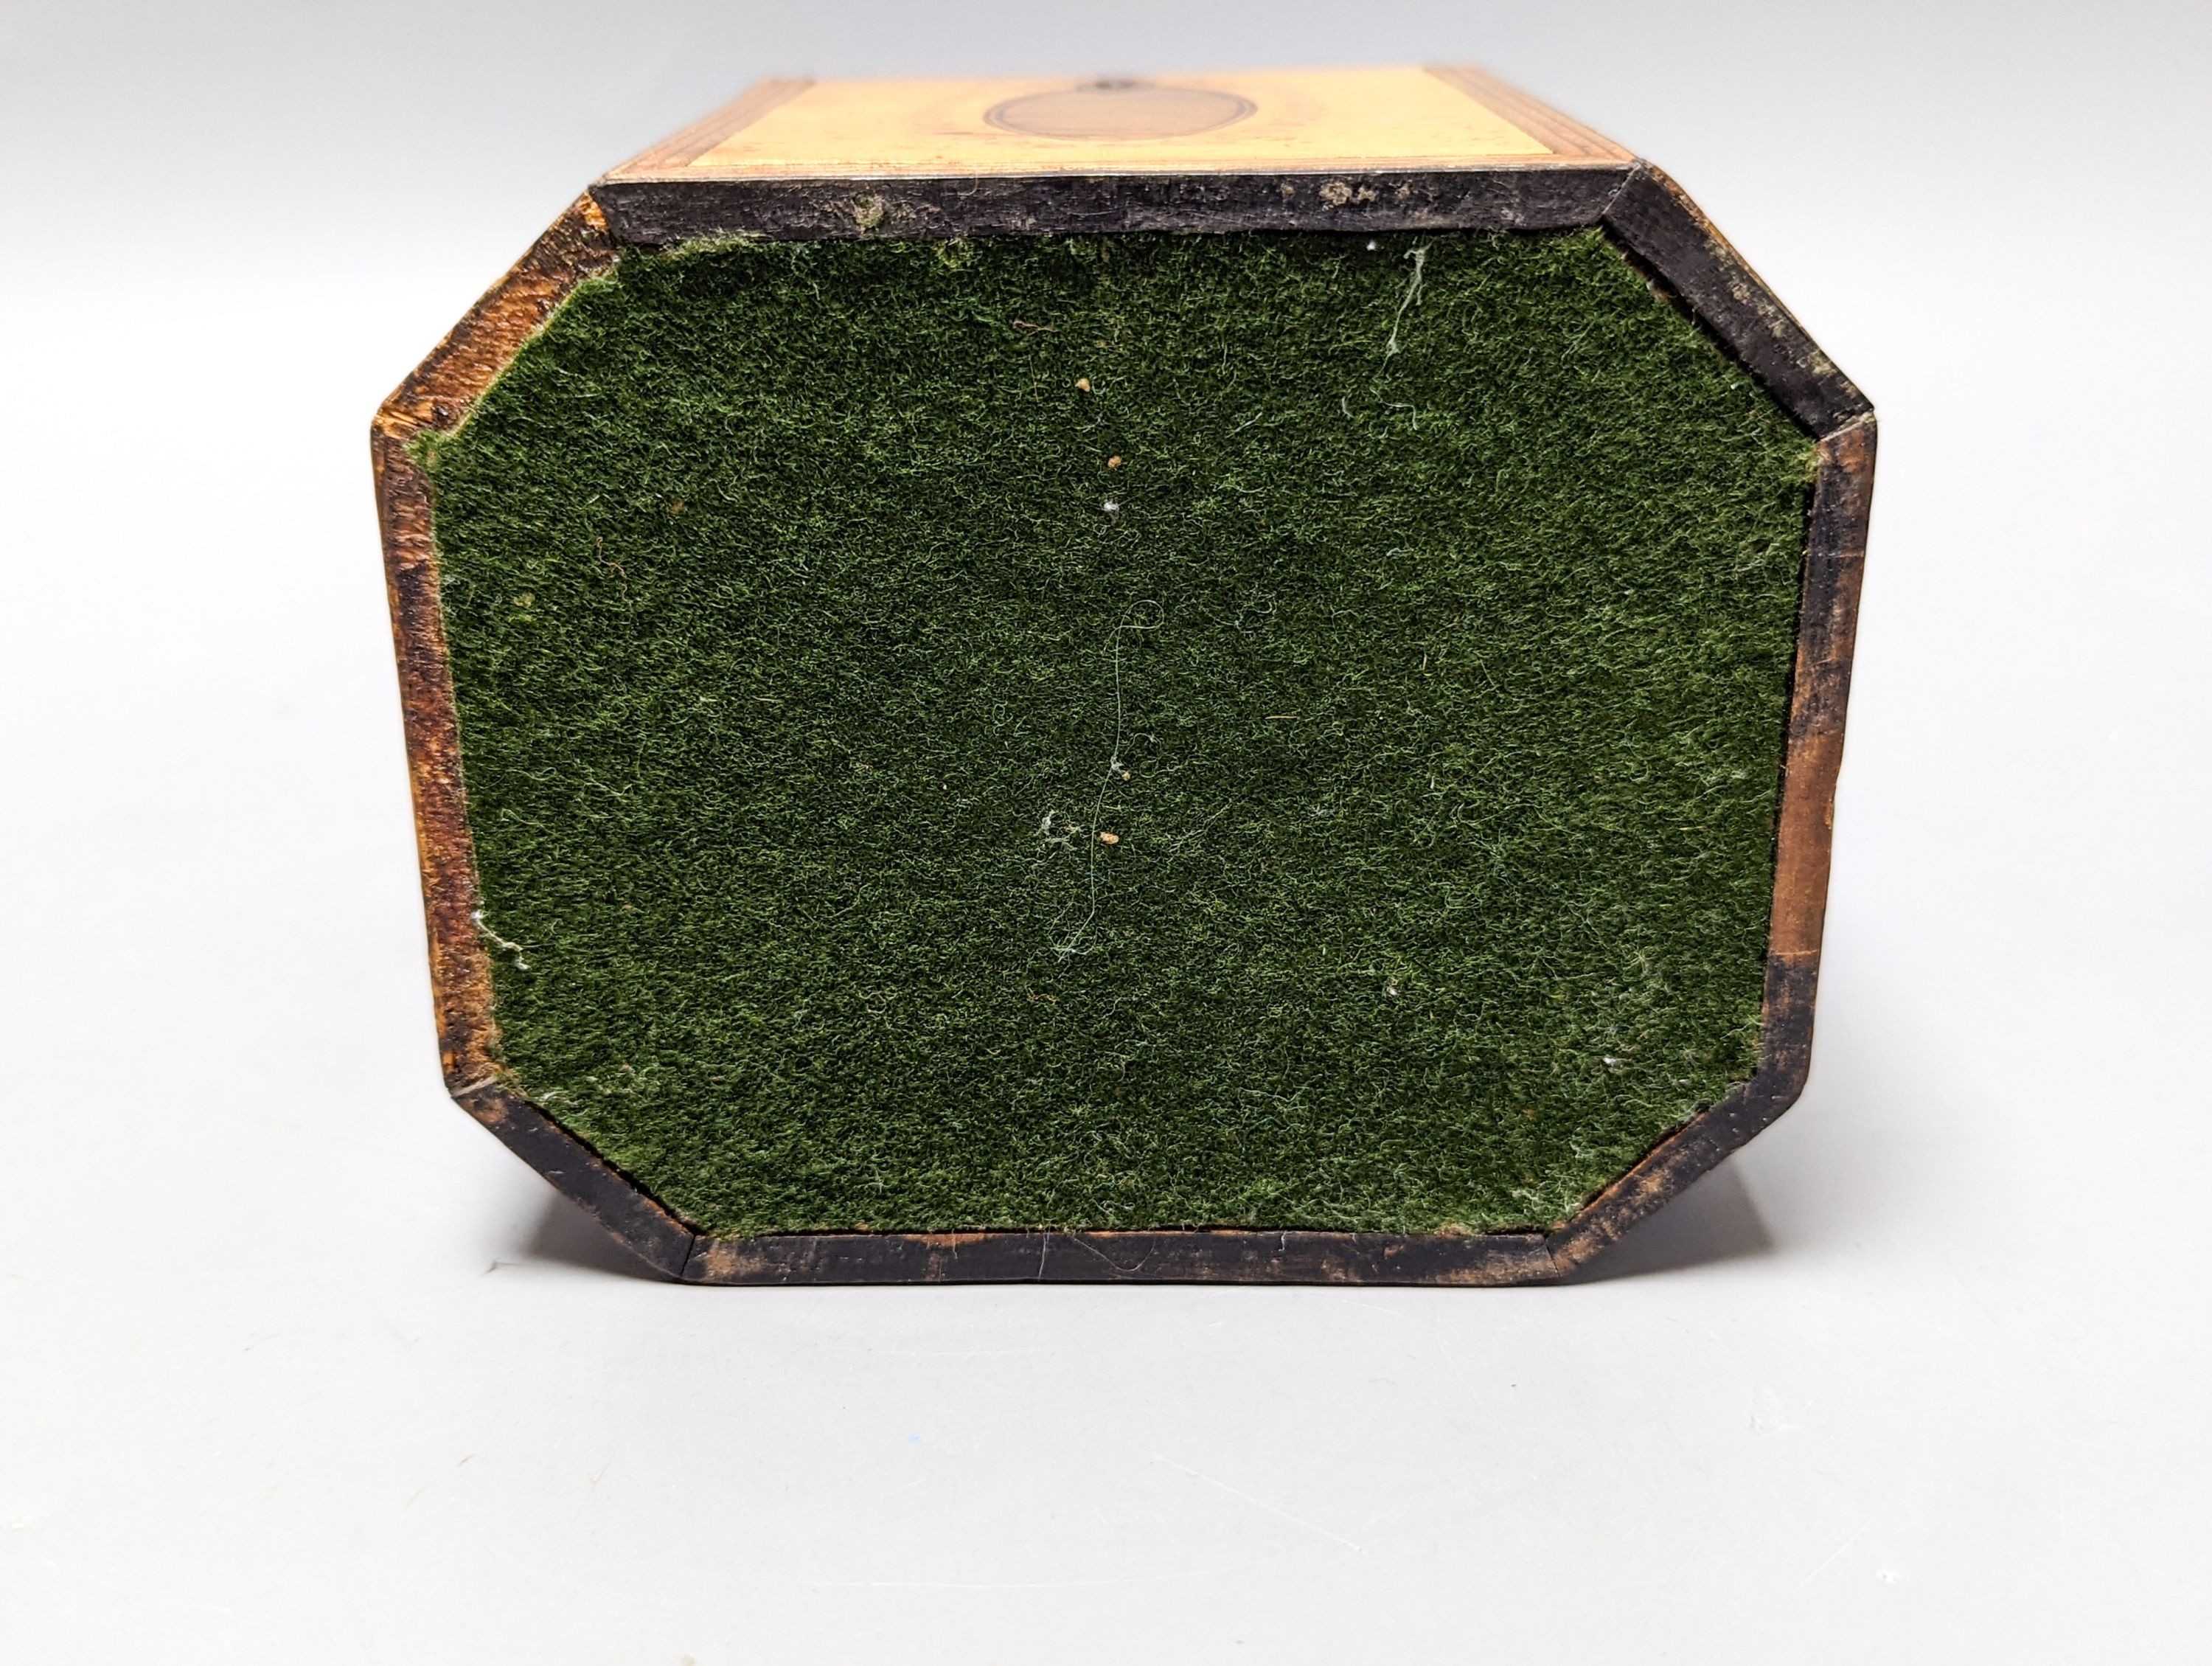 A George III octagonal sycamore and rosewood panelled tea caddy. 13cm